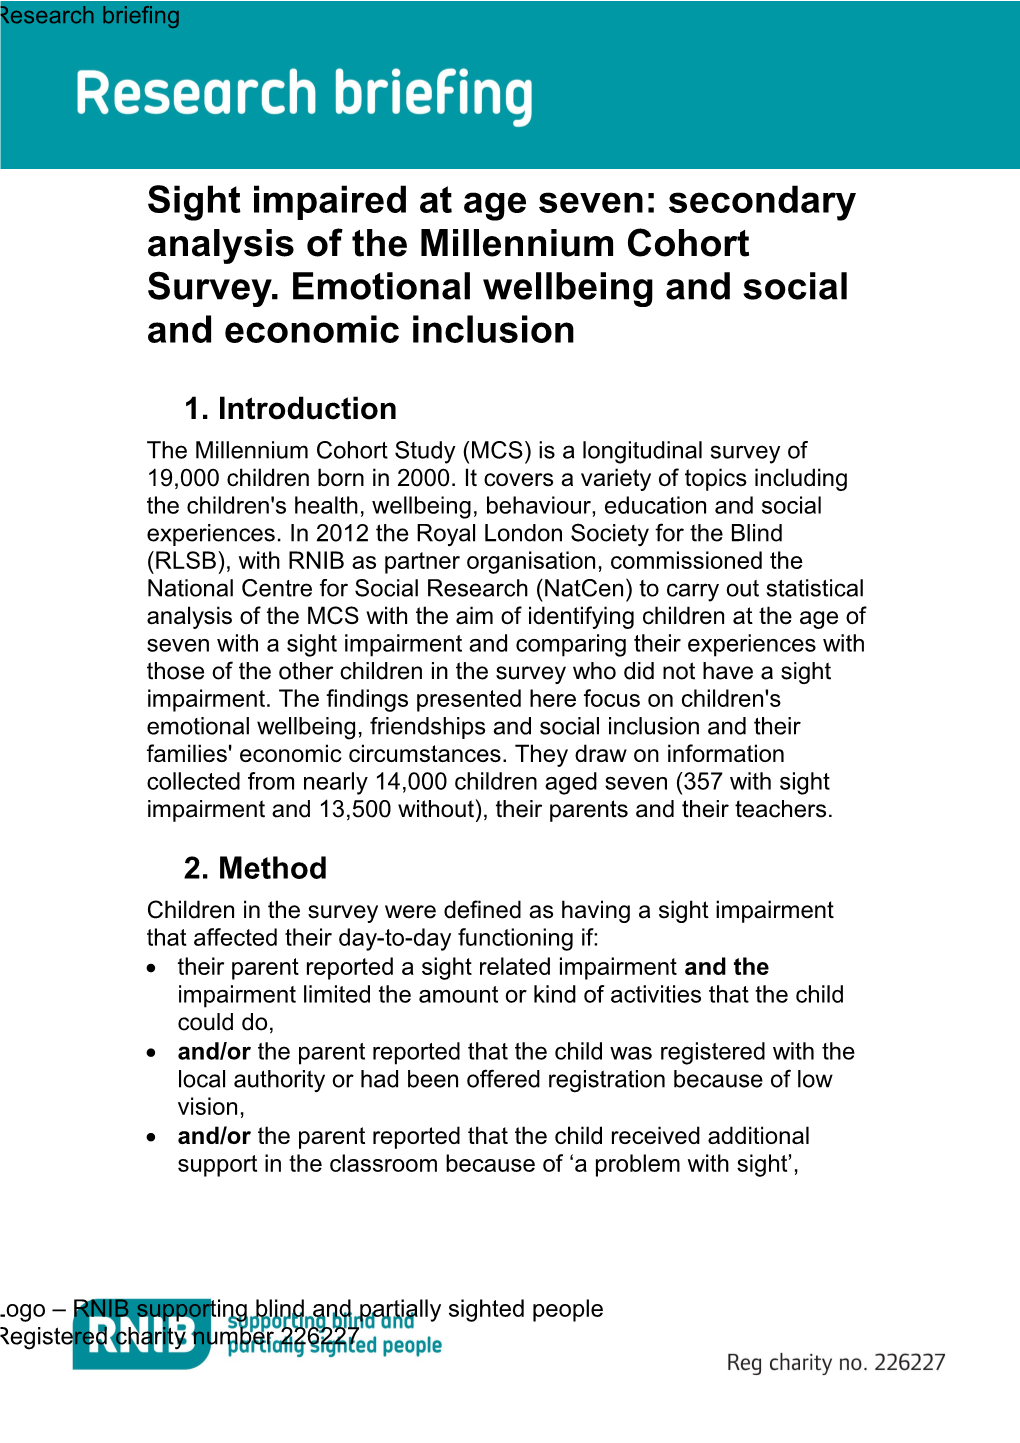 Sight Impaired at Age Seven: Secondary Analysis of the Millennium Cohort Survey. Emotional